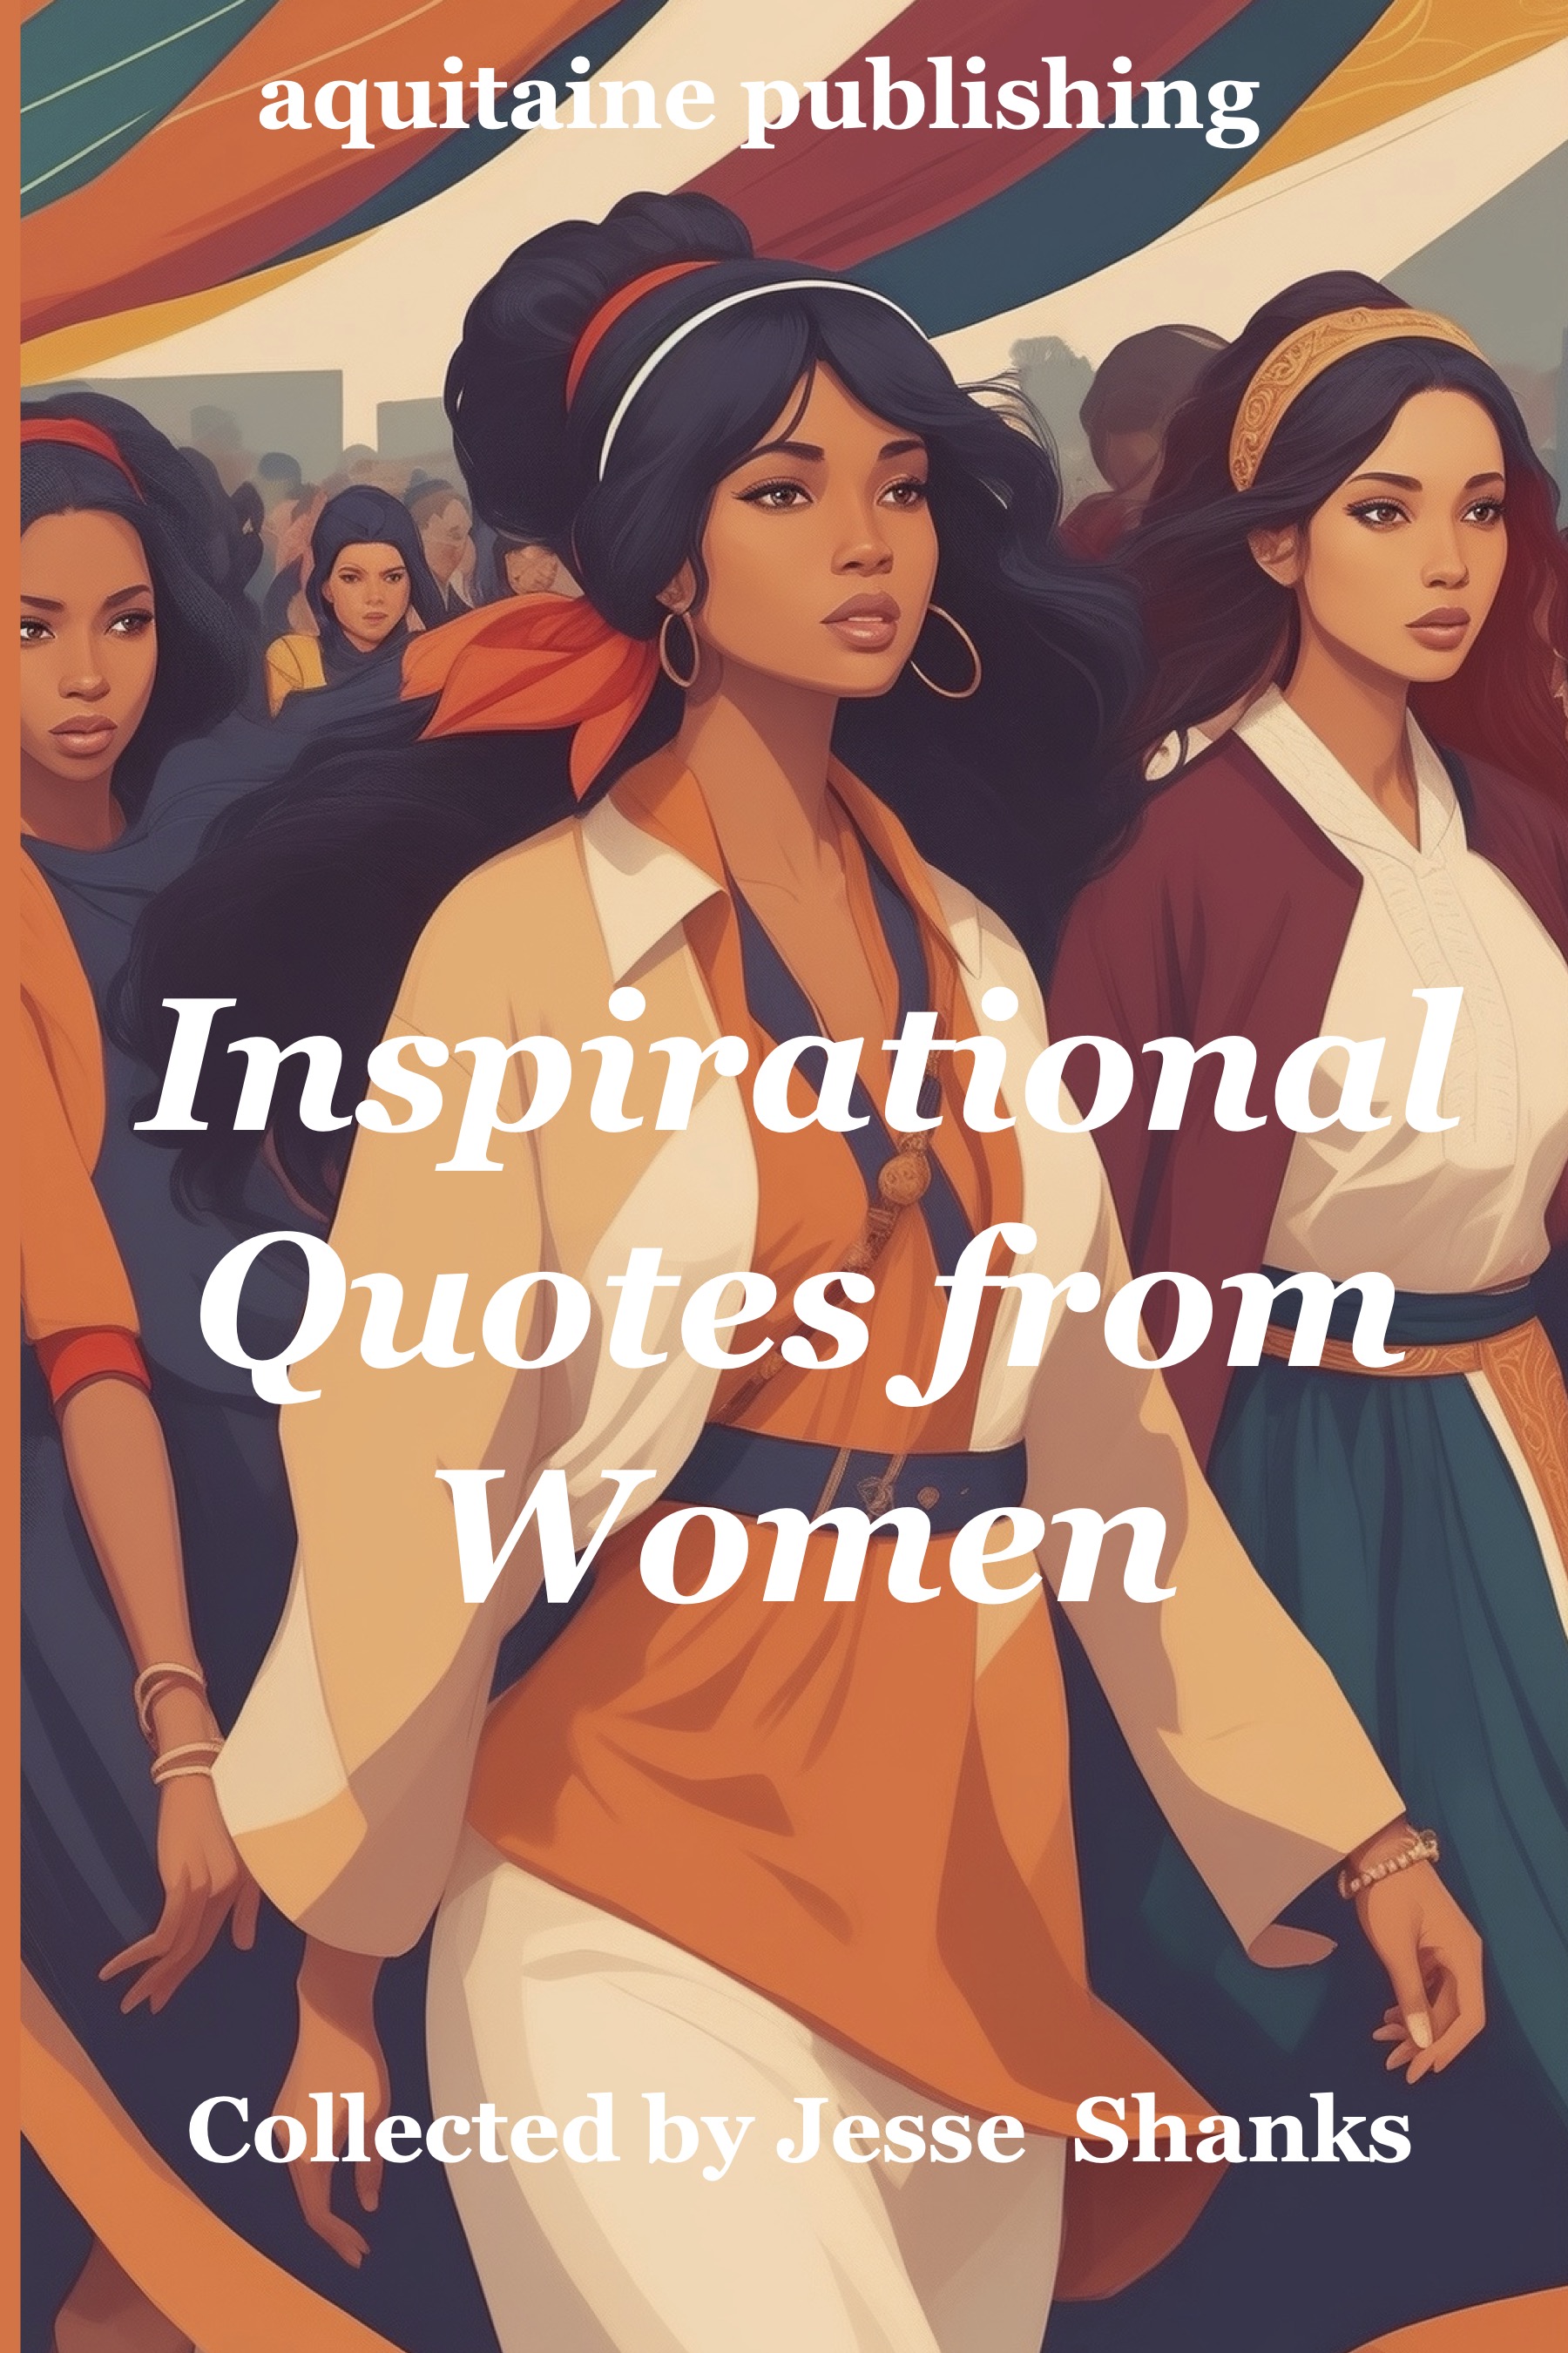 Inspirational Quotations From Women